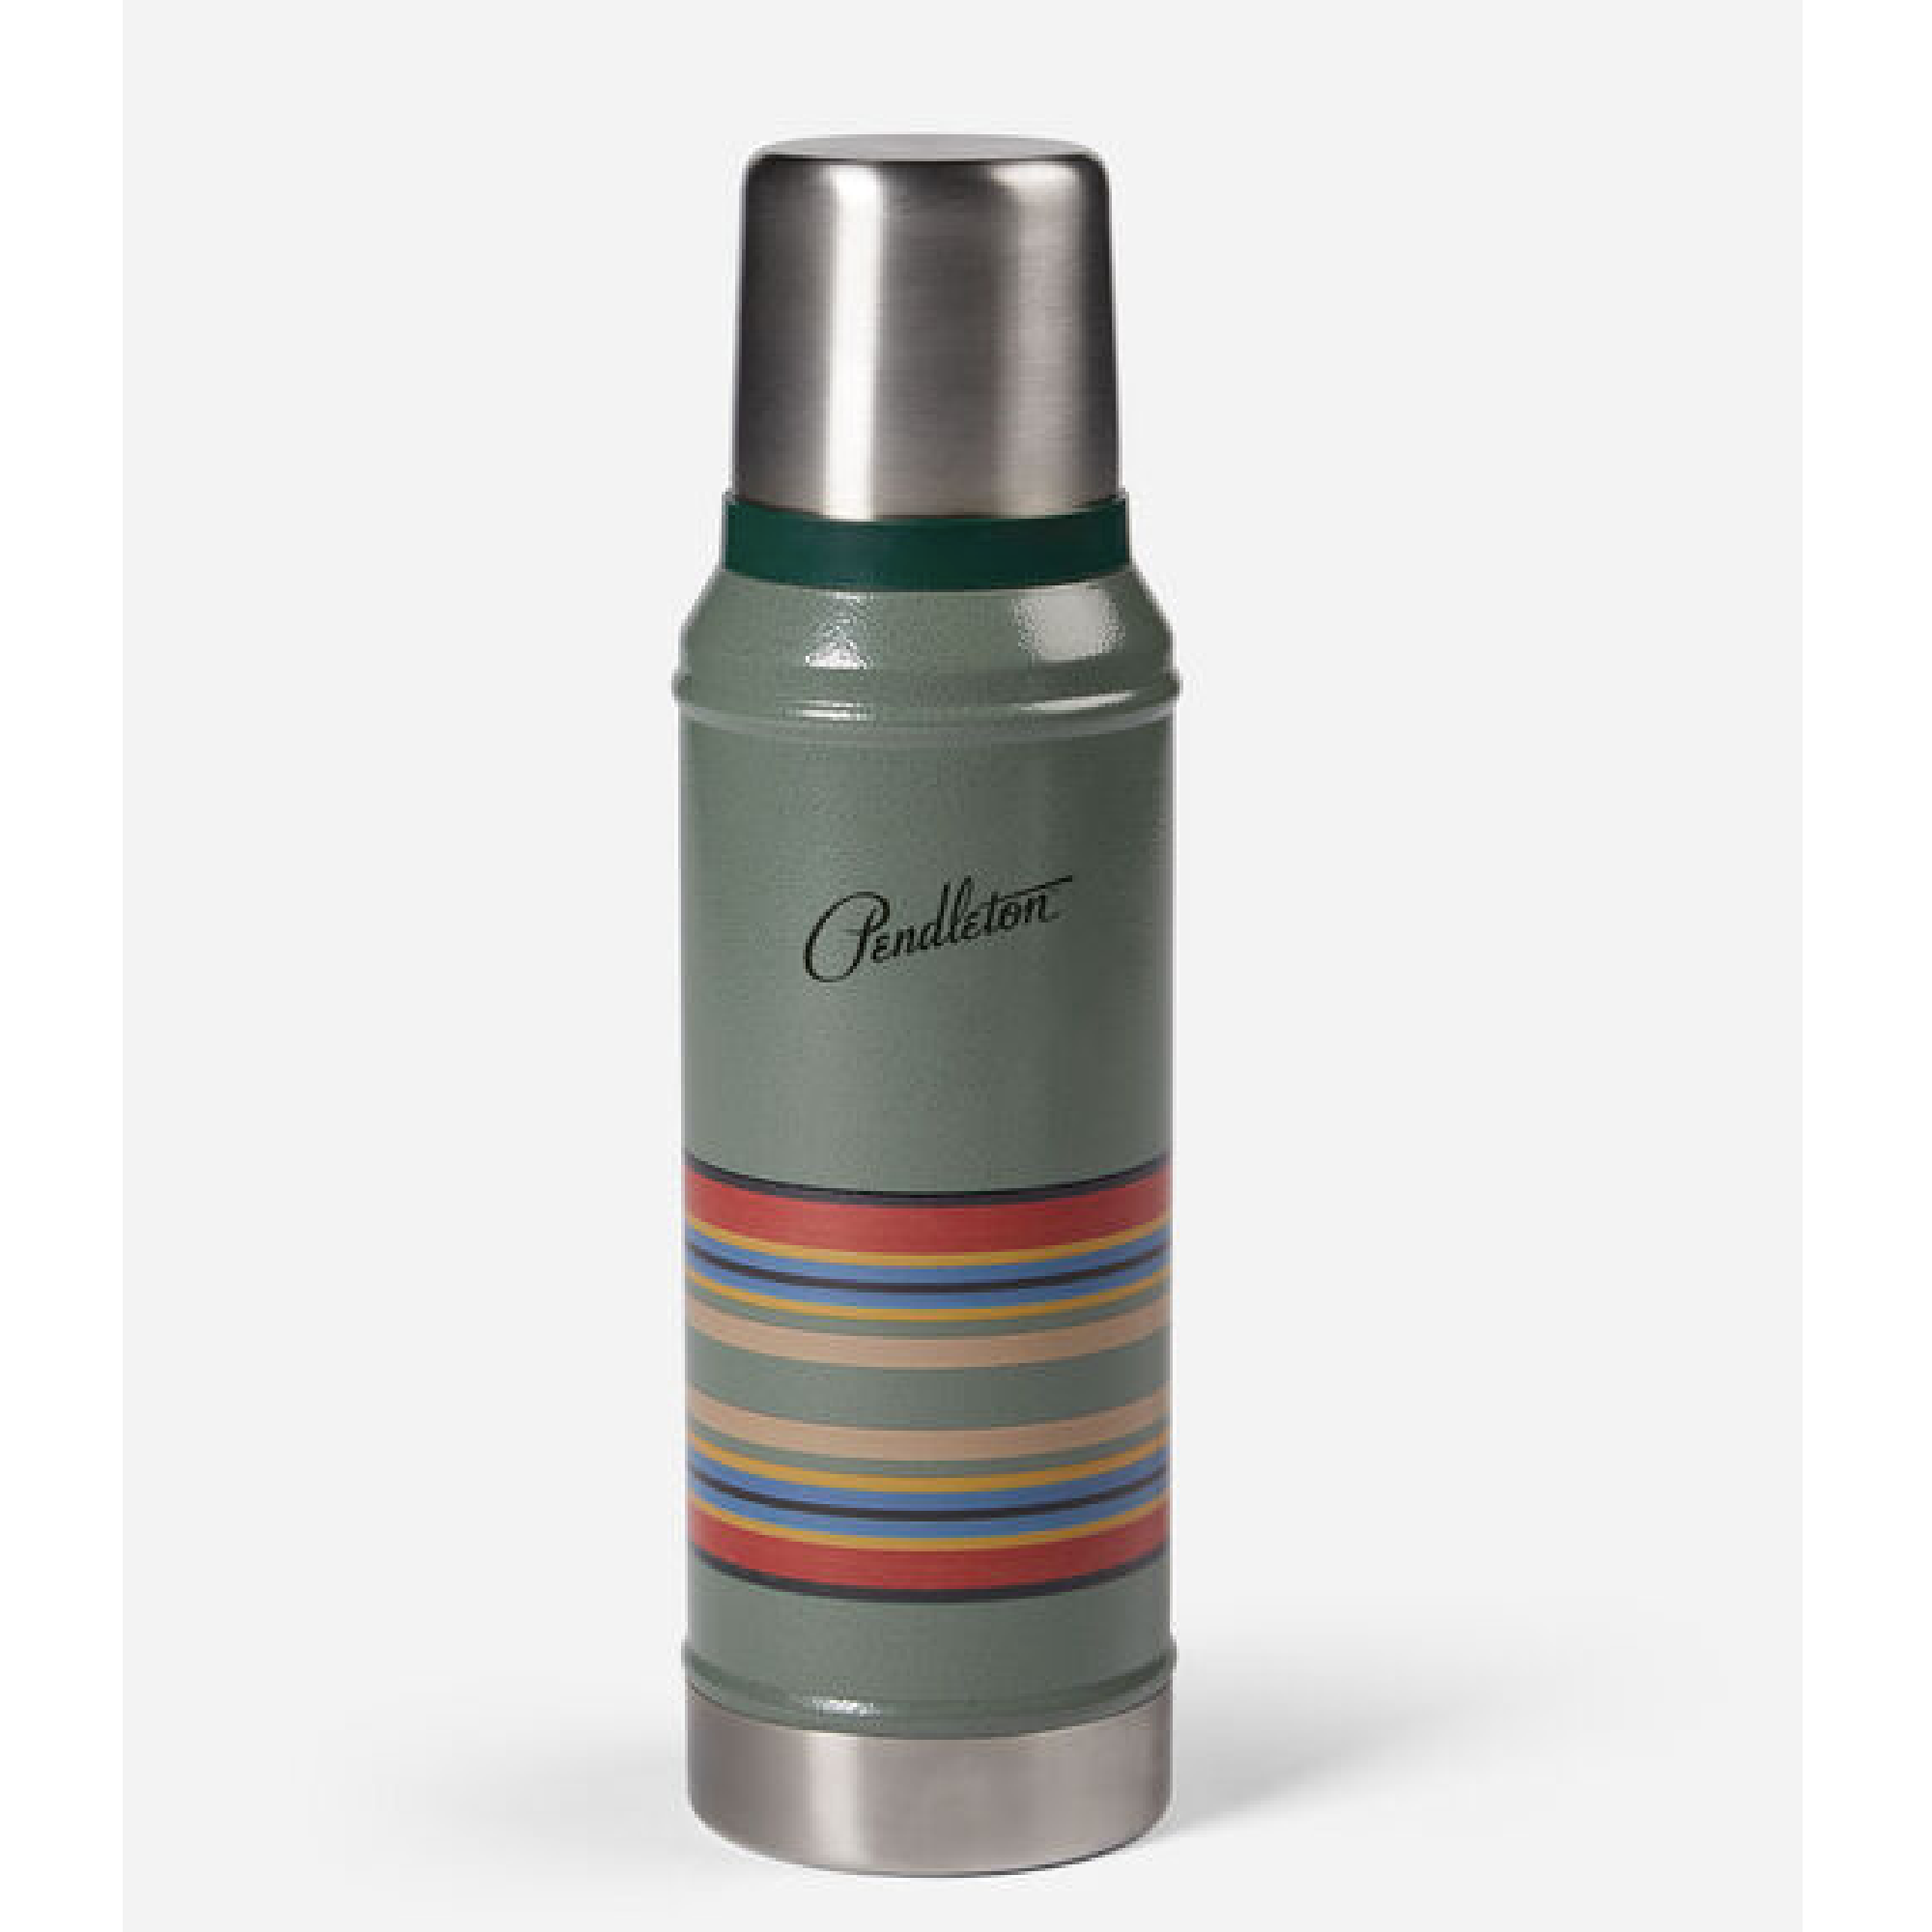 Stanley Classic Stainless Steel Vacuum Insulated Thermos Bottle